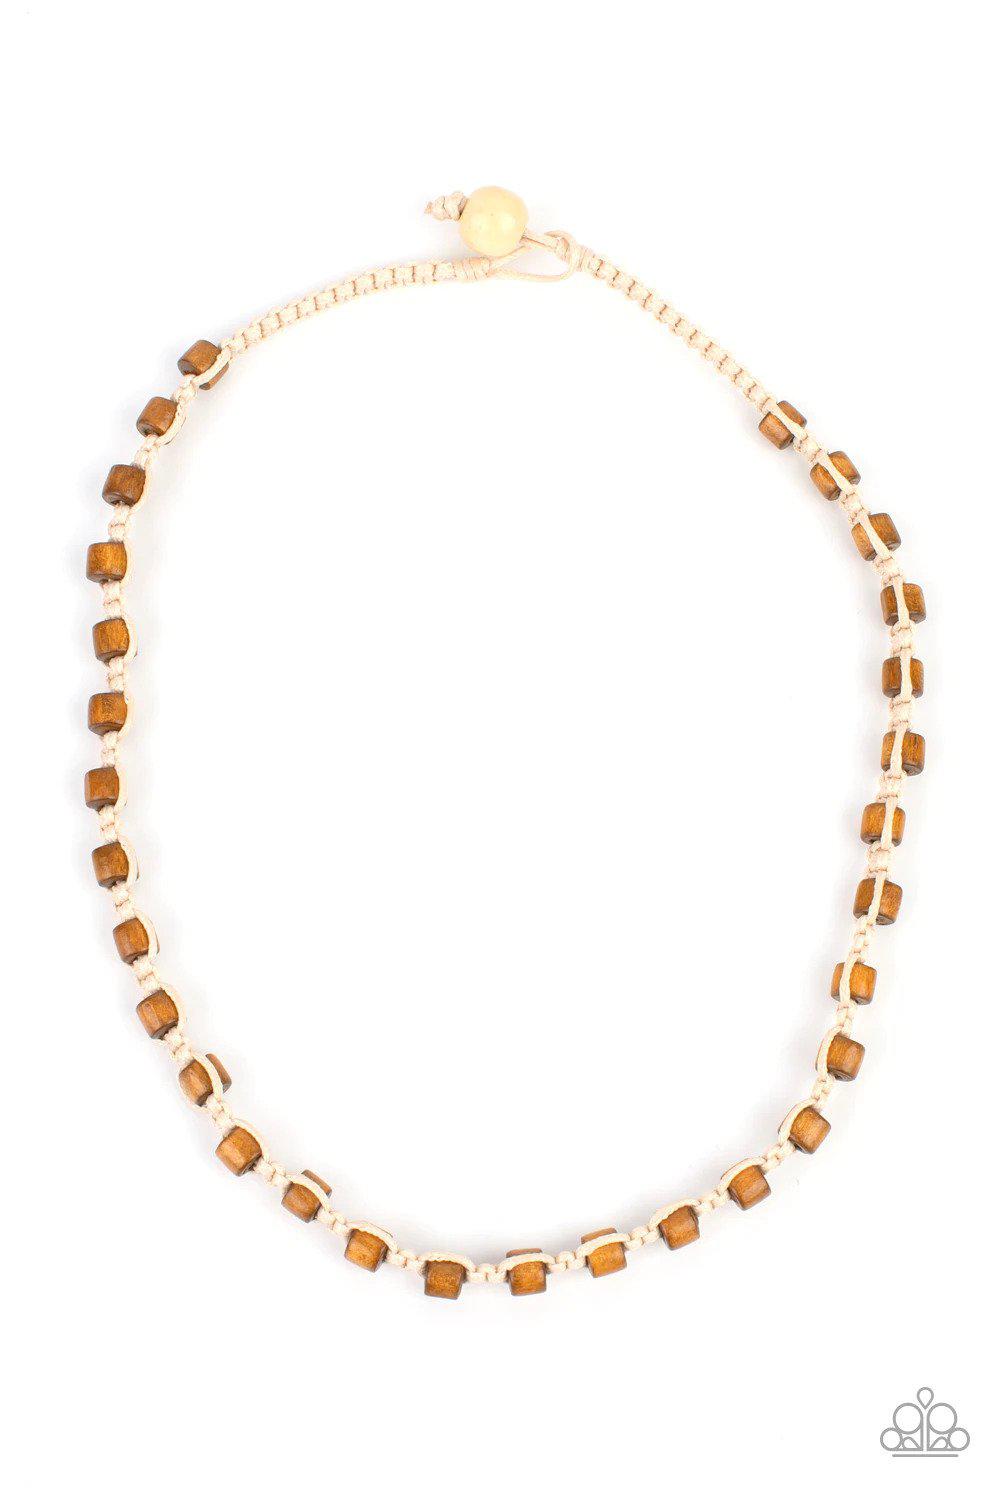 Highland Hustler Brown Urban Necklace - Paparazzi Accessories- lightbox - CarasShop.com - $5 Jewelry by Cara Jewels